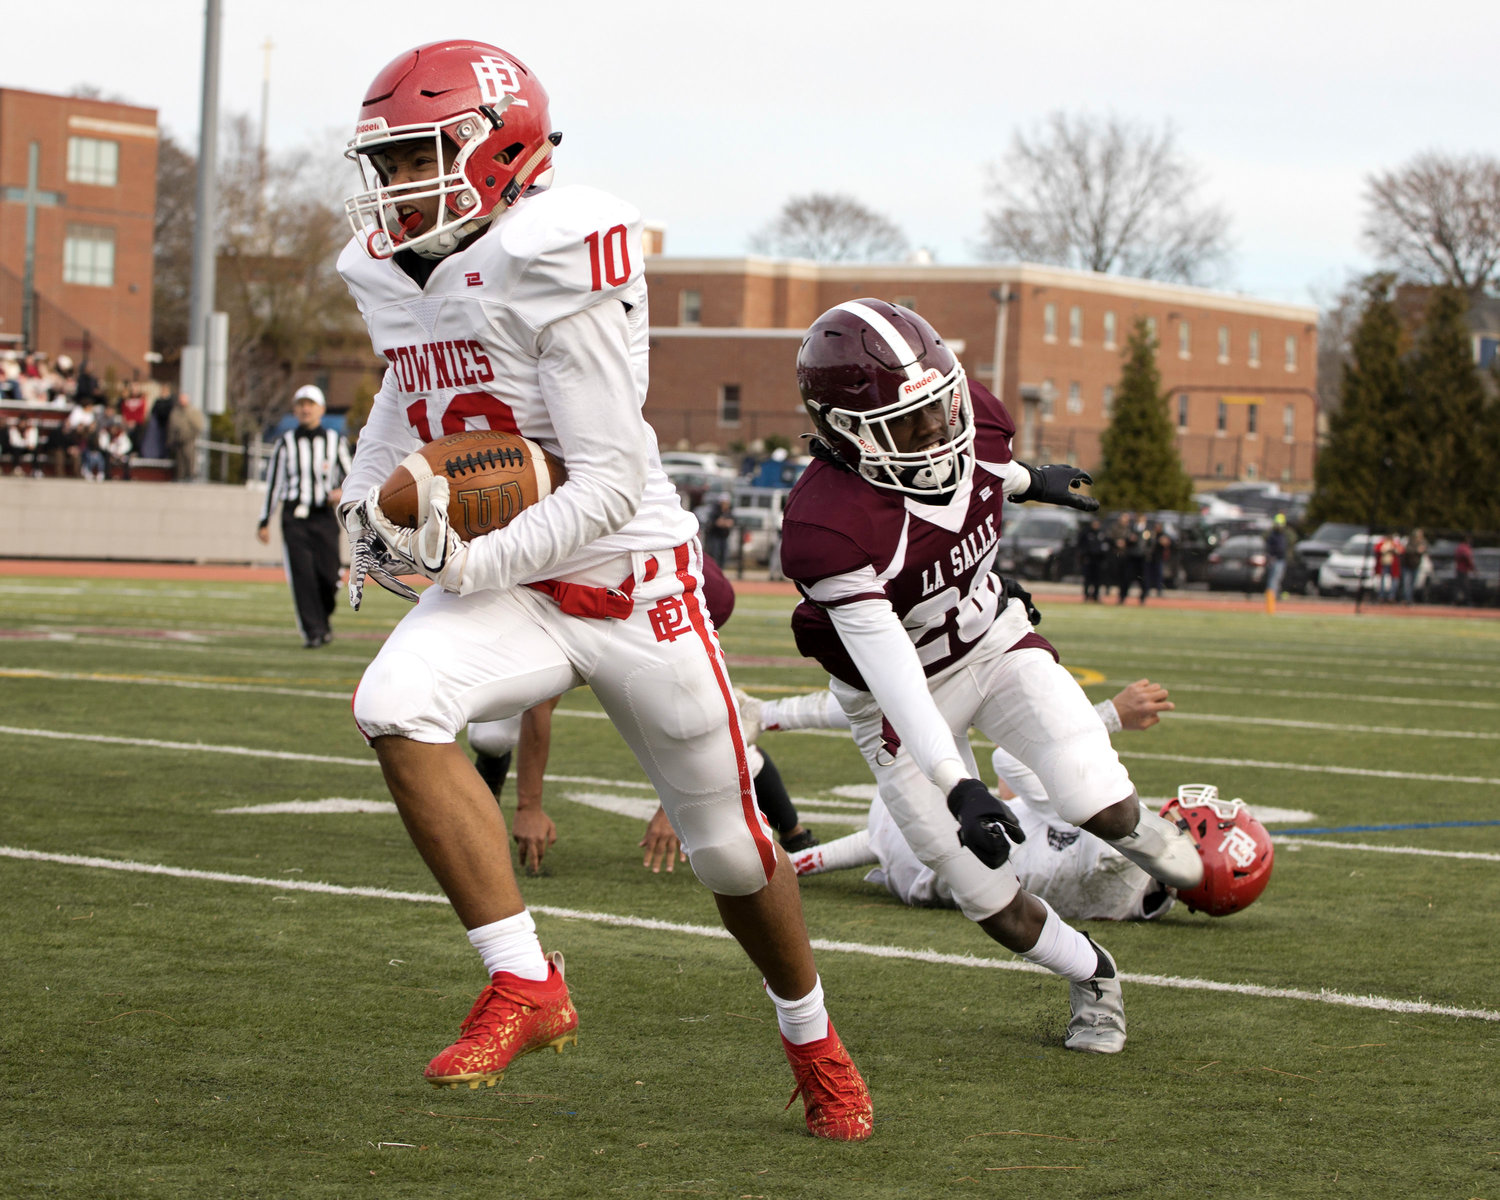 East Providence’s Xavier Hazard finds a gap and races toward the LaSalle goal line, gaining significant yardage for the Townies during the second half of the teams' 2021 Thanksgiving game played November 25 in Providence.